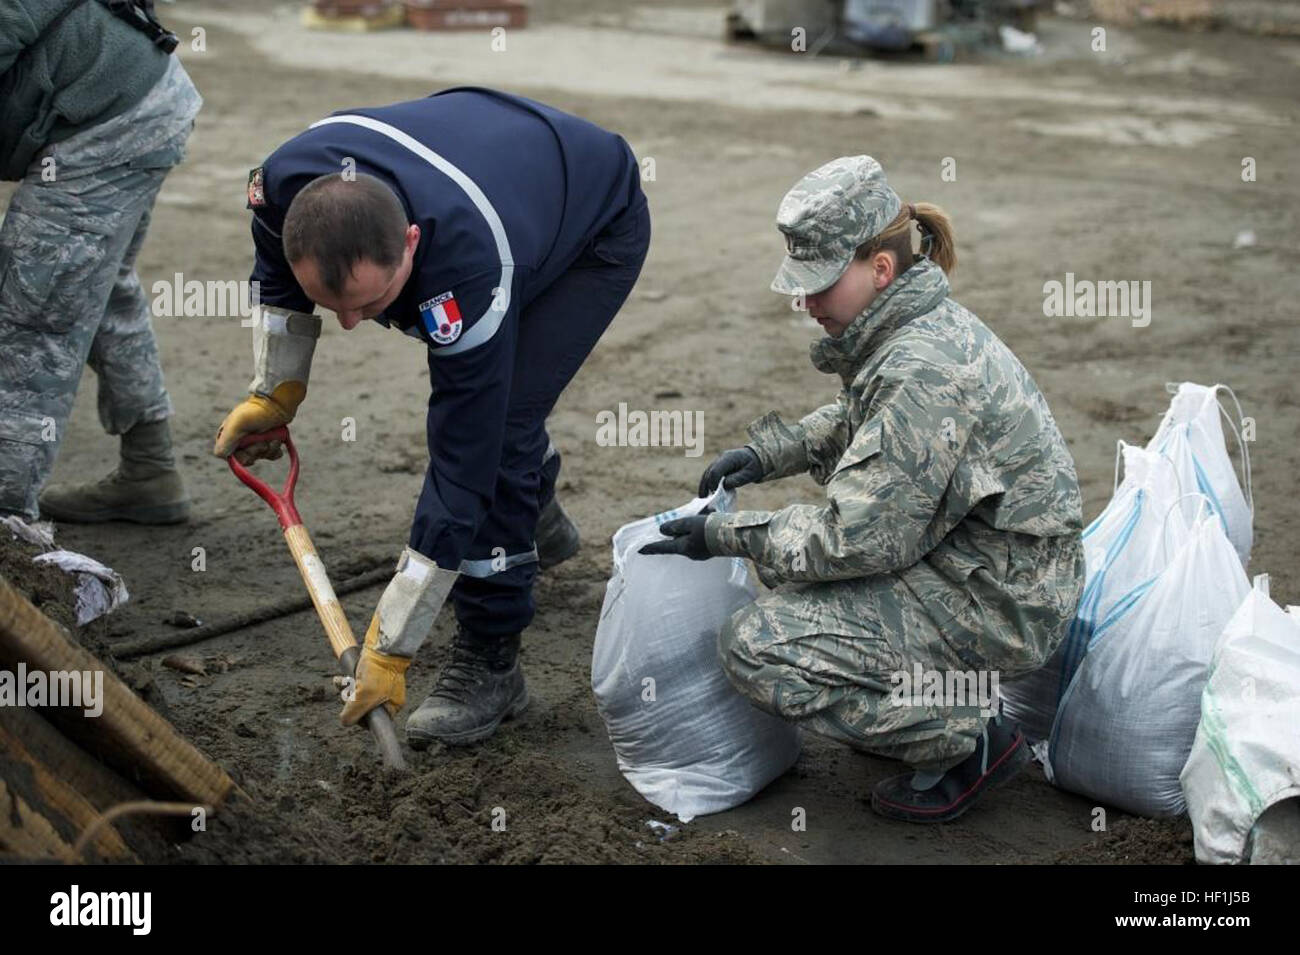 Second Lt. Christina Heino from Hydepark, N.Y., assigned to the 301st Intelligence Squadron, works alongside members of the French army to clean up a local road during a cleanup effort here in this tsunami-battered city. More than 130 volunteers from Misawa Air Base and members of the French army and Fire Department assisted in a cleanup effort in the northern Japanese city that was devastated by a 9.0-magnitude earthquake that triggered a devastating tsunami on Japan's eastern coastline. (U.S. Navy photo by Cryptologic Technician (Collection) 2nd Class Thomas Ahern/Released) Flickr - DVIDSHUB Stock Photo